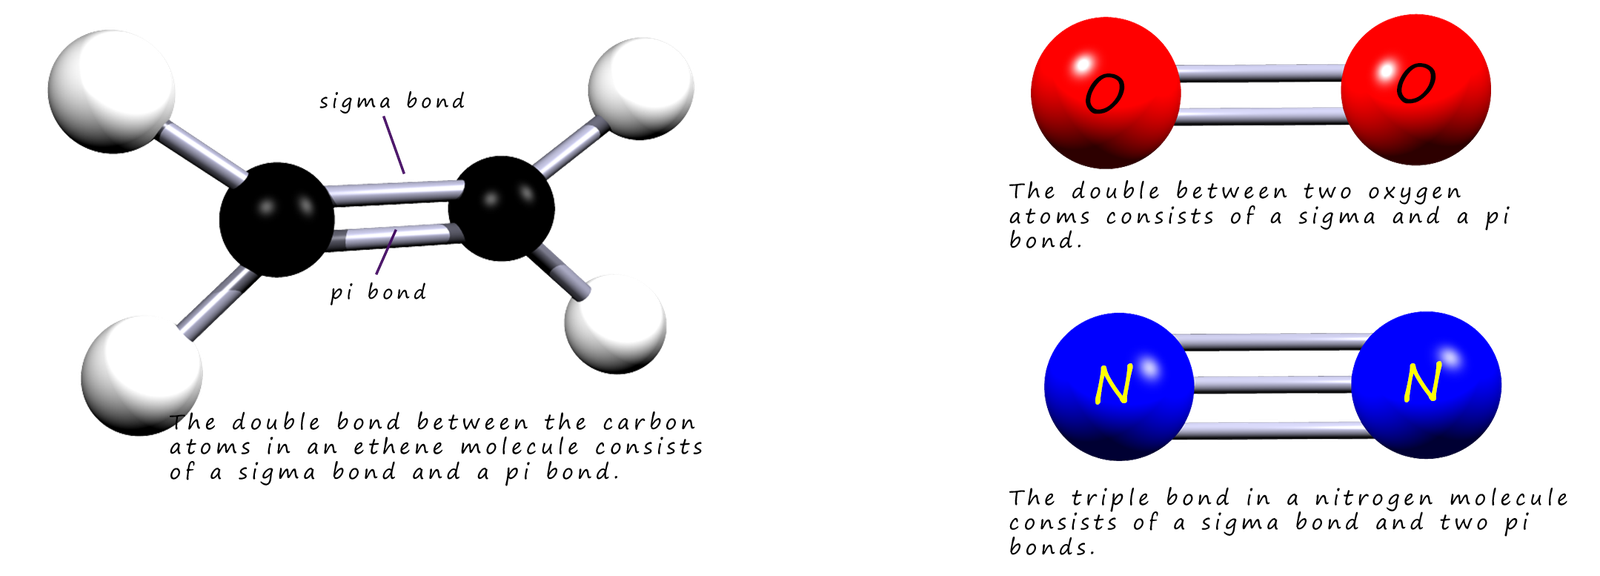 Molecules which contain multiple covalent bonds such as oxygen and nitrogen, these multiple covalent bonds consist of a mixture of sigma and pi bonds.